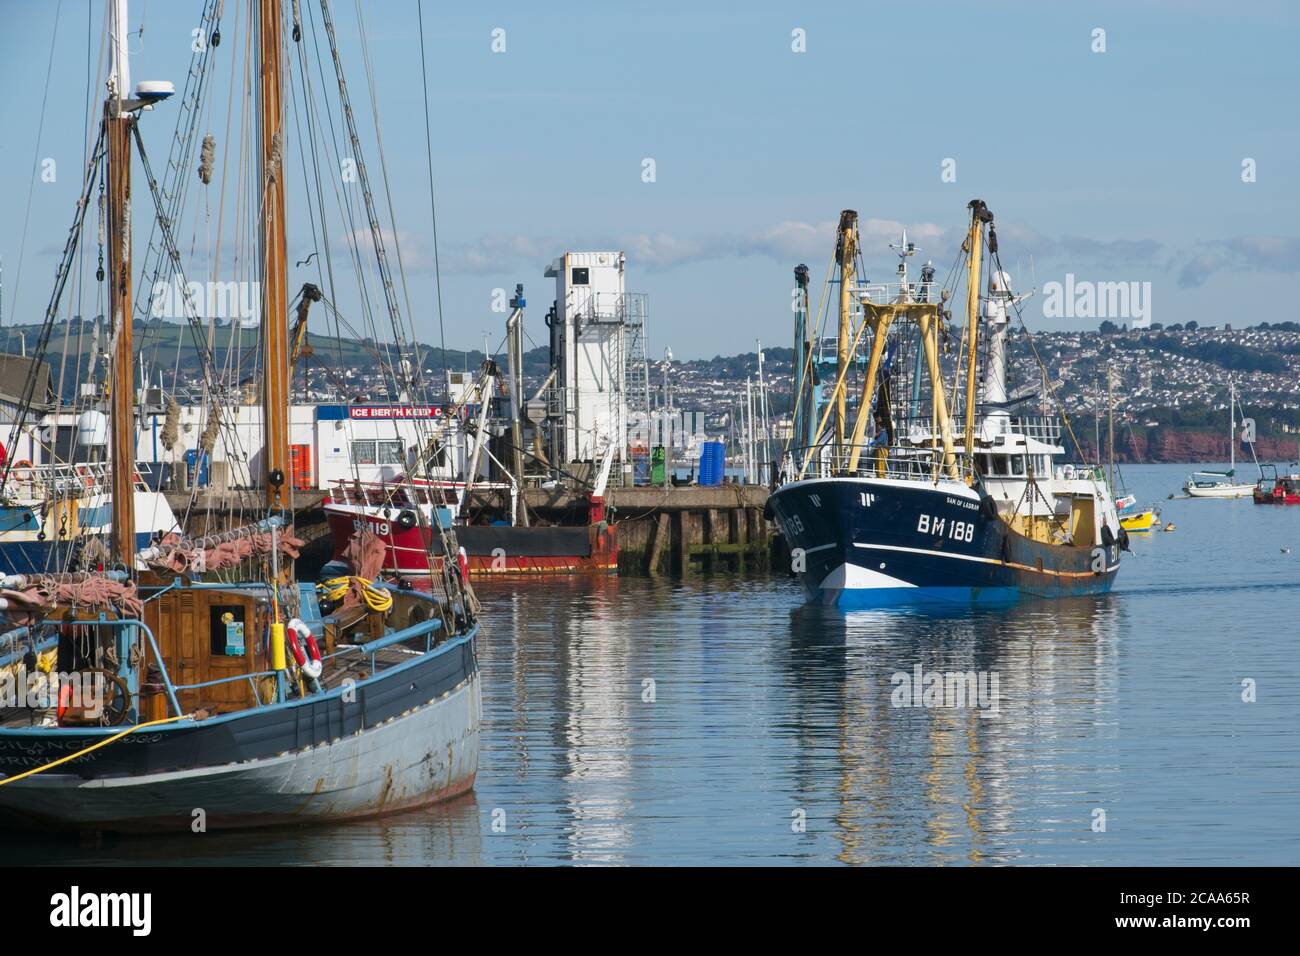 Brixham Trawler BM188 Sam of Ladram returning to port Large seagoing trawlers maneuvering in Brixham harbour Frontal view Calm sea and light blue sky Stock Photo